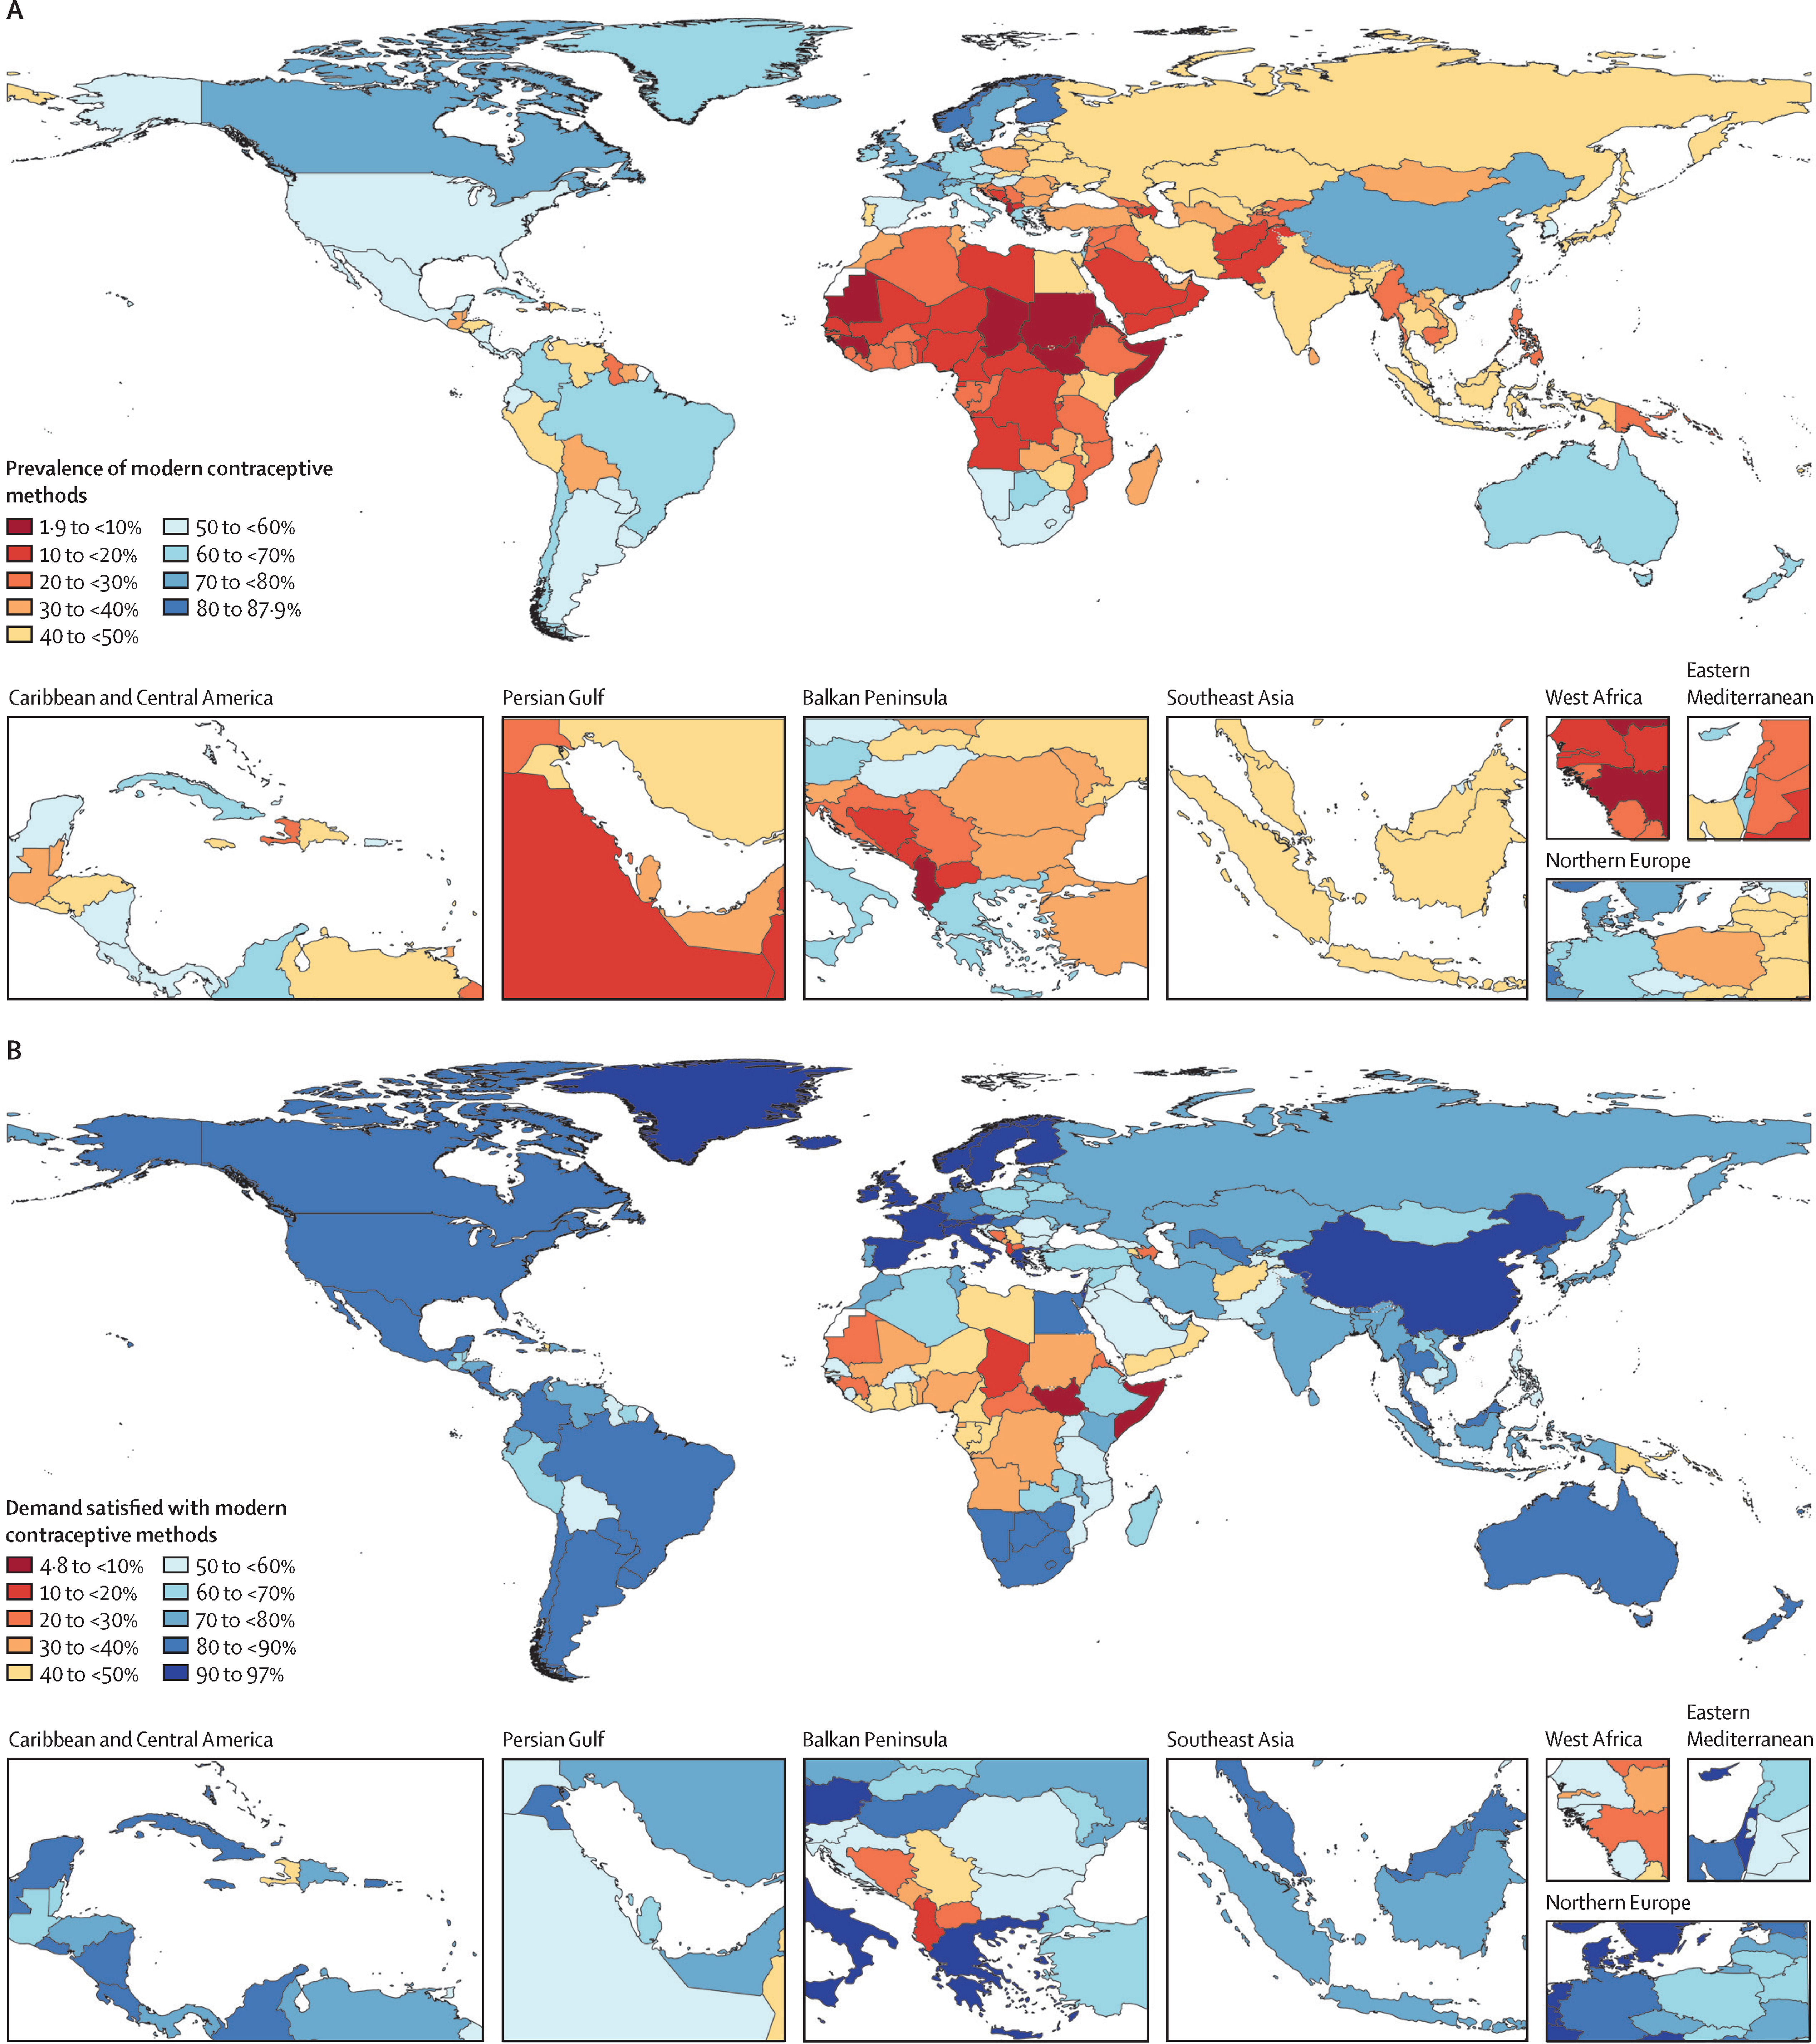 Figure 1. Prevalence of modern contraceptive methods among women of reproductive age (15–49 years) and demand satisfied with modern contraceptive methods by location, 2019